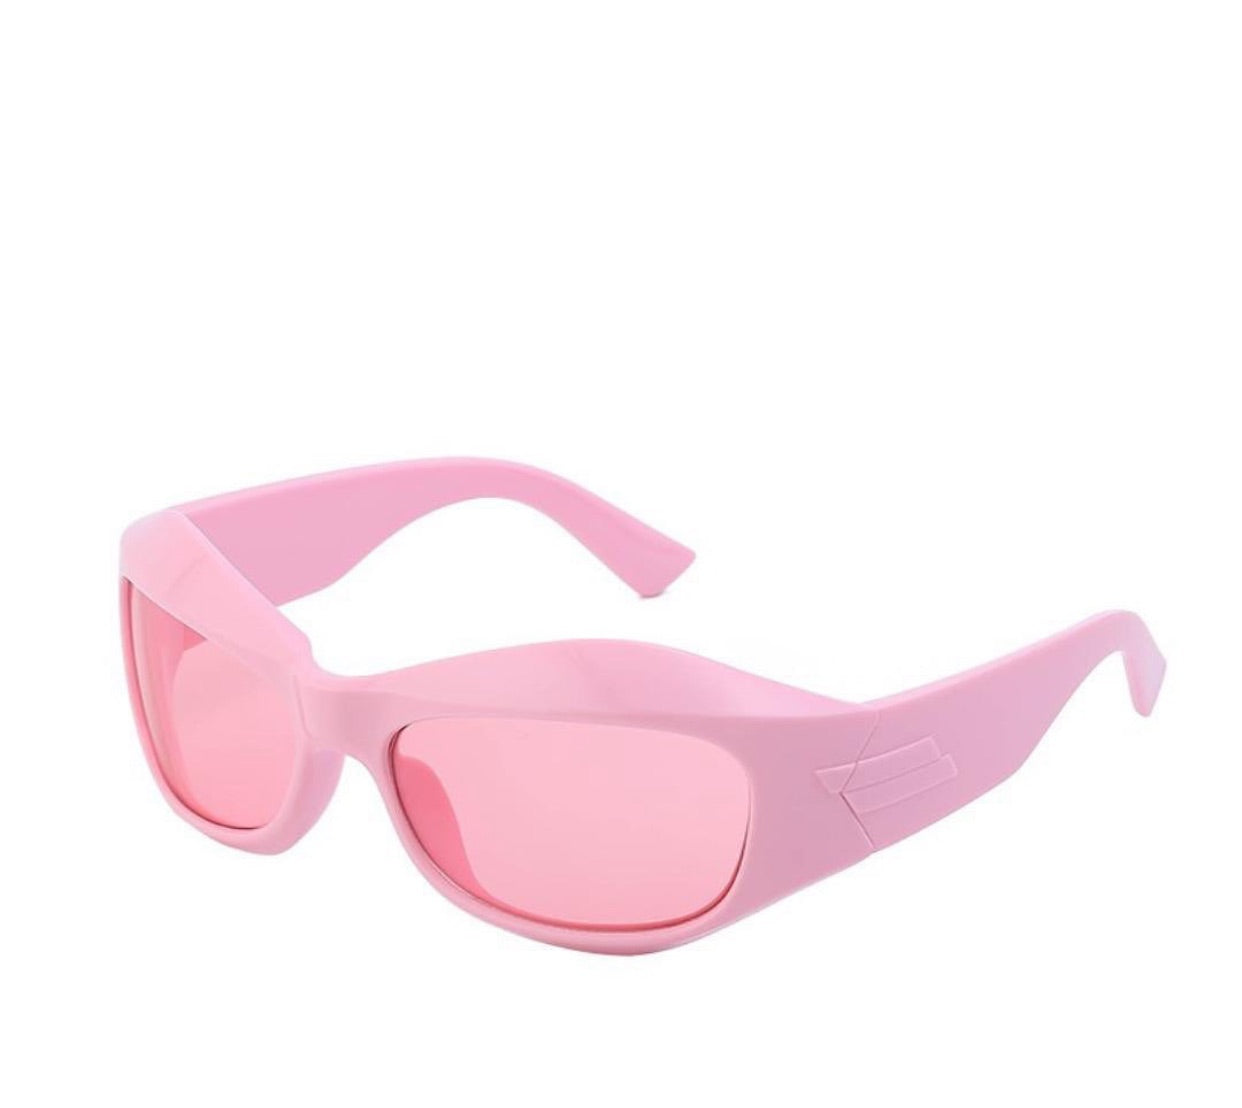 Wrap around acetate glasses in pink